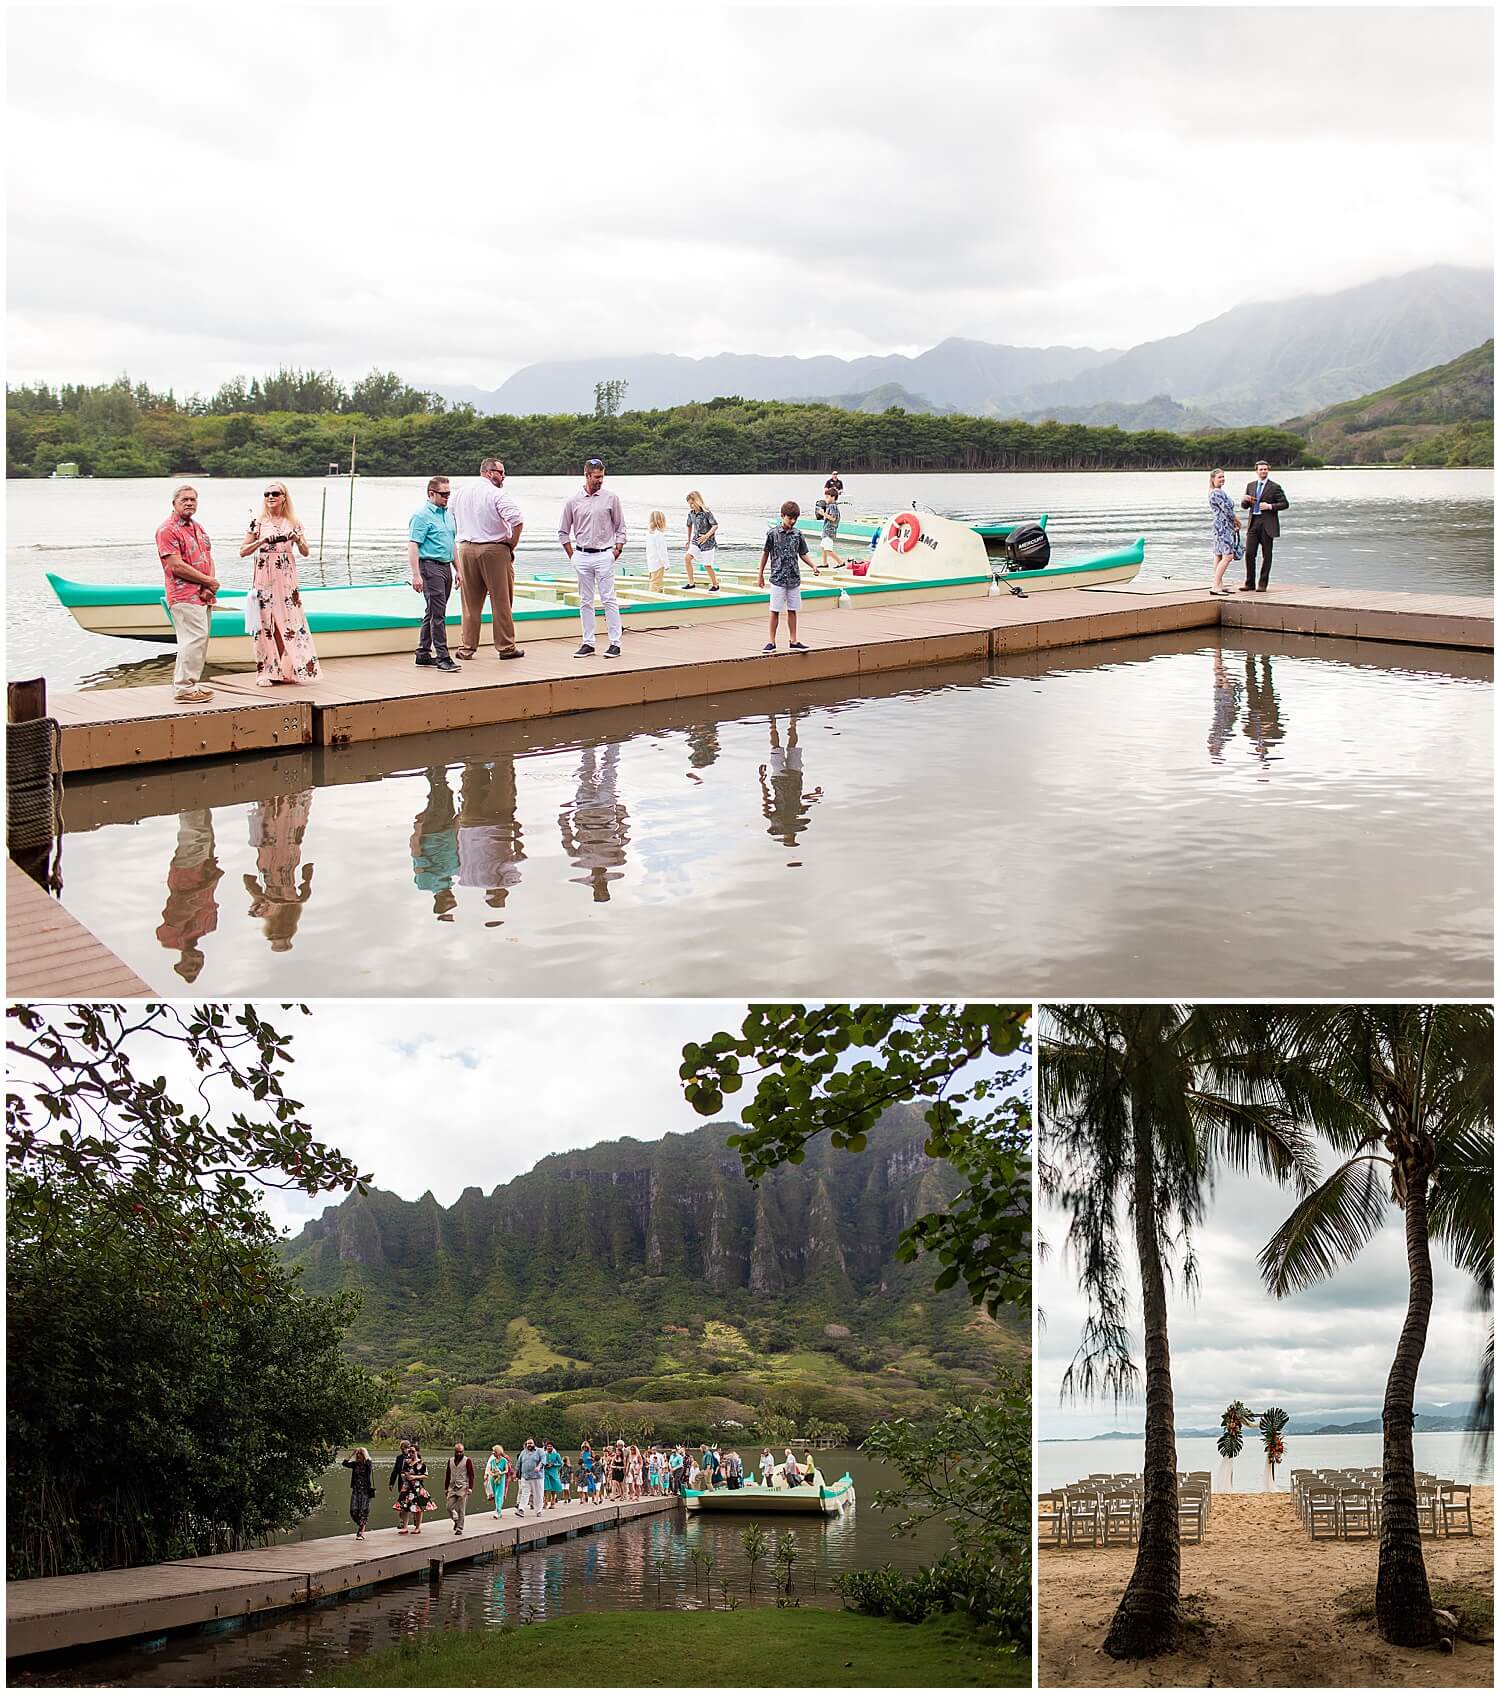 Wedding guests arrive by boat to secret island for ceremony by Oahu wedding photographer 